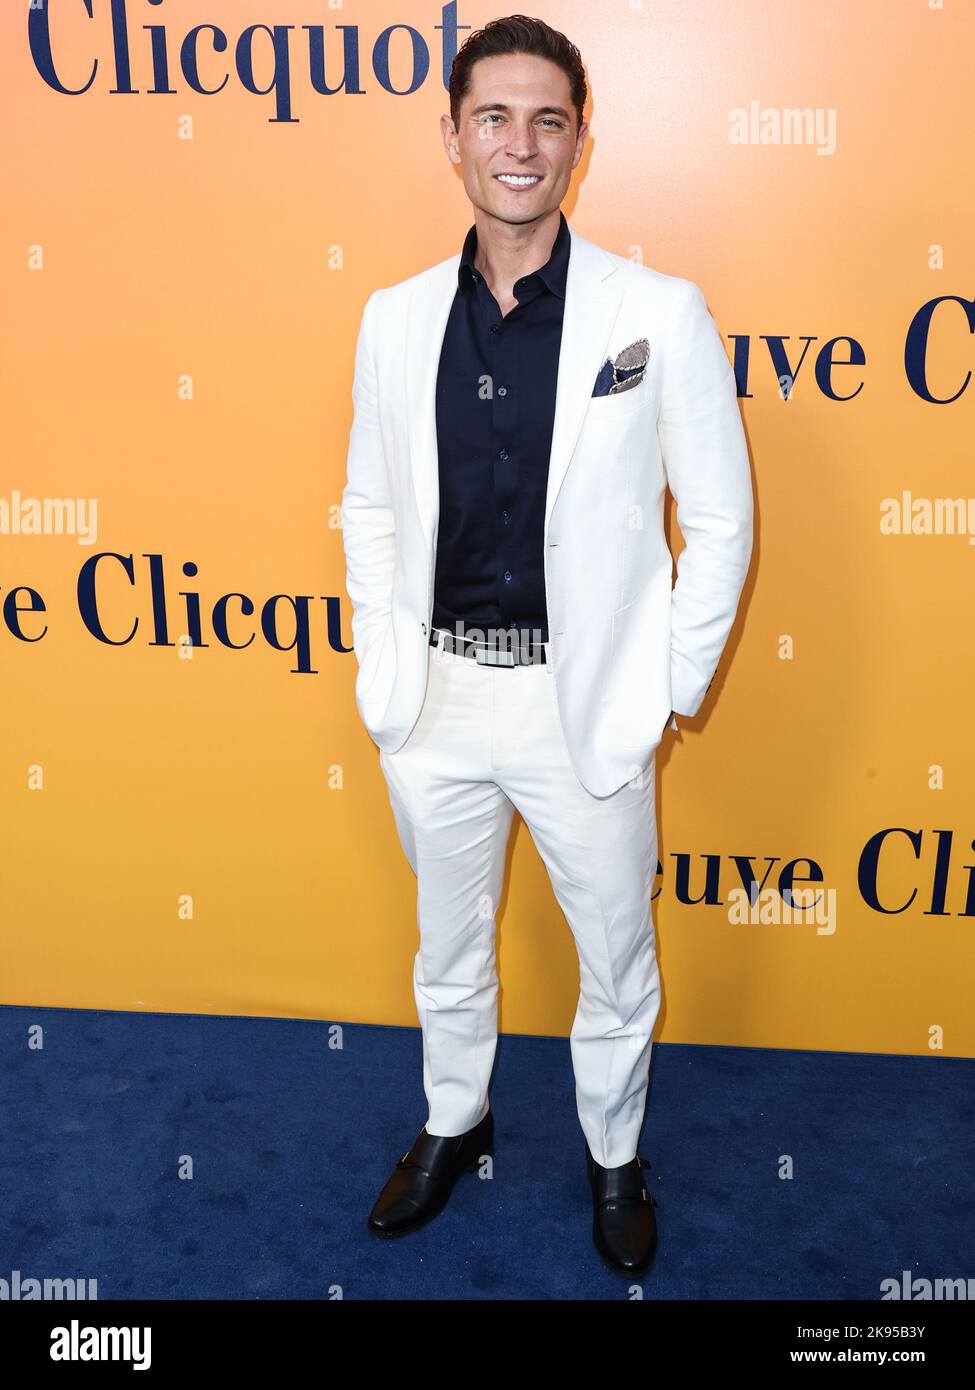 BEVERLY HILLS, LOS ANGELES, CALIFORNIA, USA - OCTOBER 25: American actor Elijah Allan-Blitz arrives at the Veuve Clicquot 250th Anniversary Solaire Culture Exhibition Opening held at 468 North Rodeo Drive on October 25, 2022 in Beverly Hills, Los Angeles, California, United States. (Photo by Xavier Collin/Image Press Agency) Stock Photo